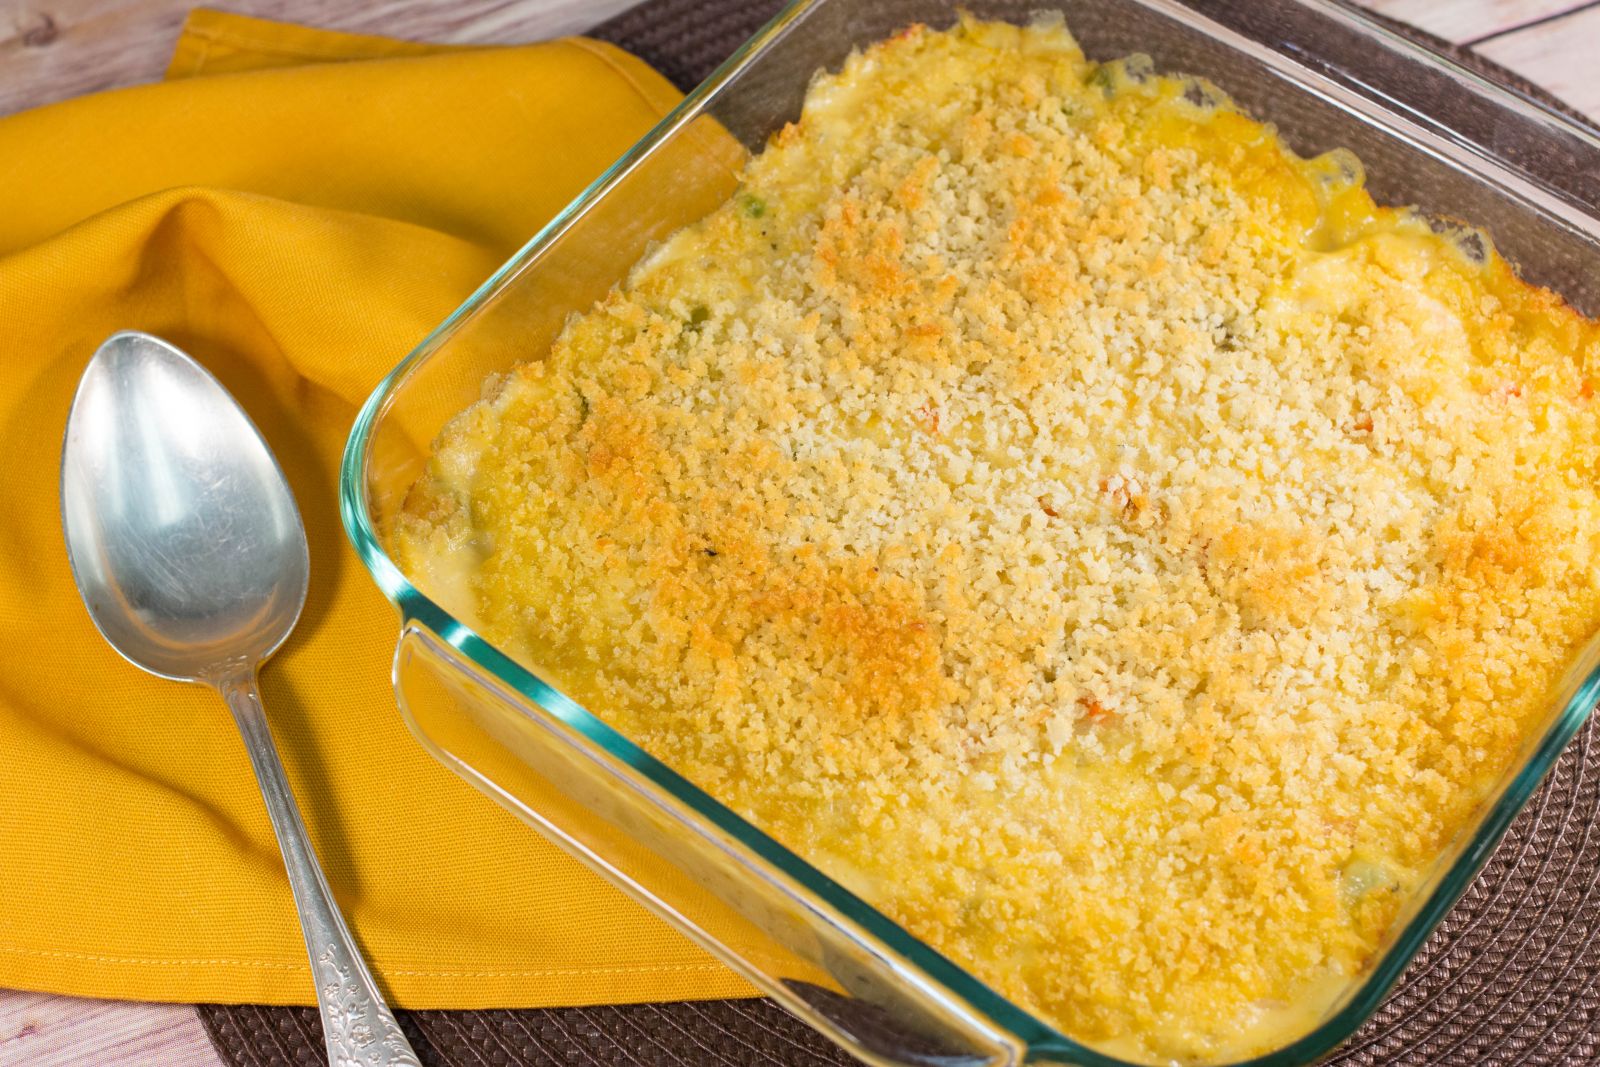 Copycat Stouffer's Chicken and Rice Bake